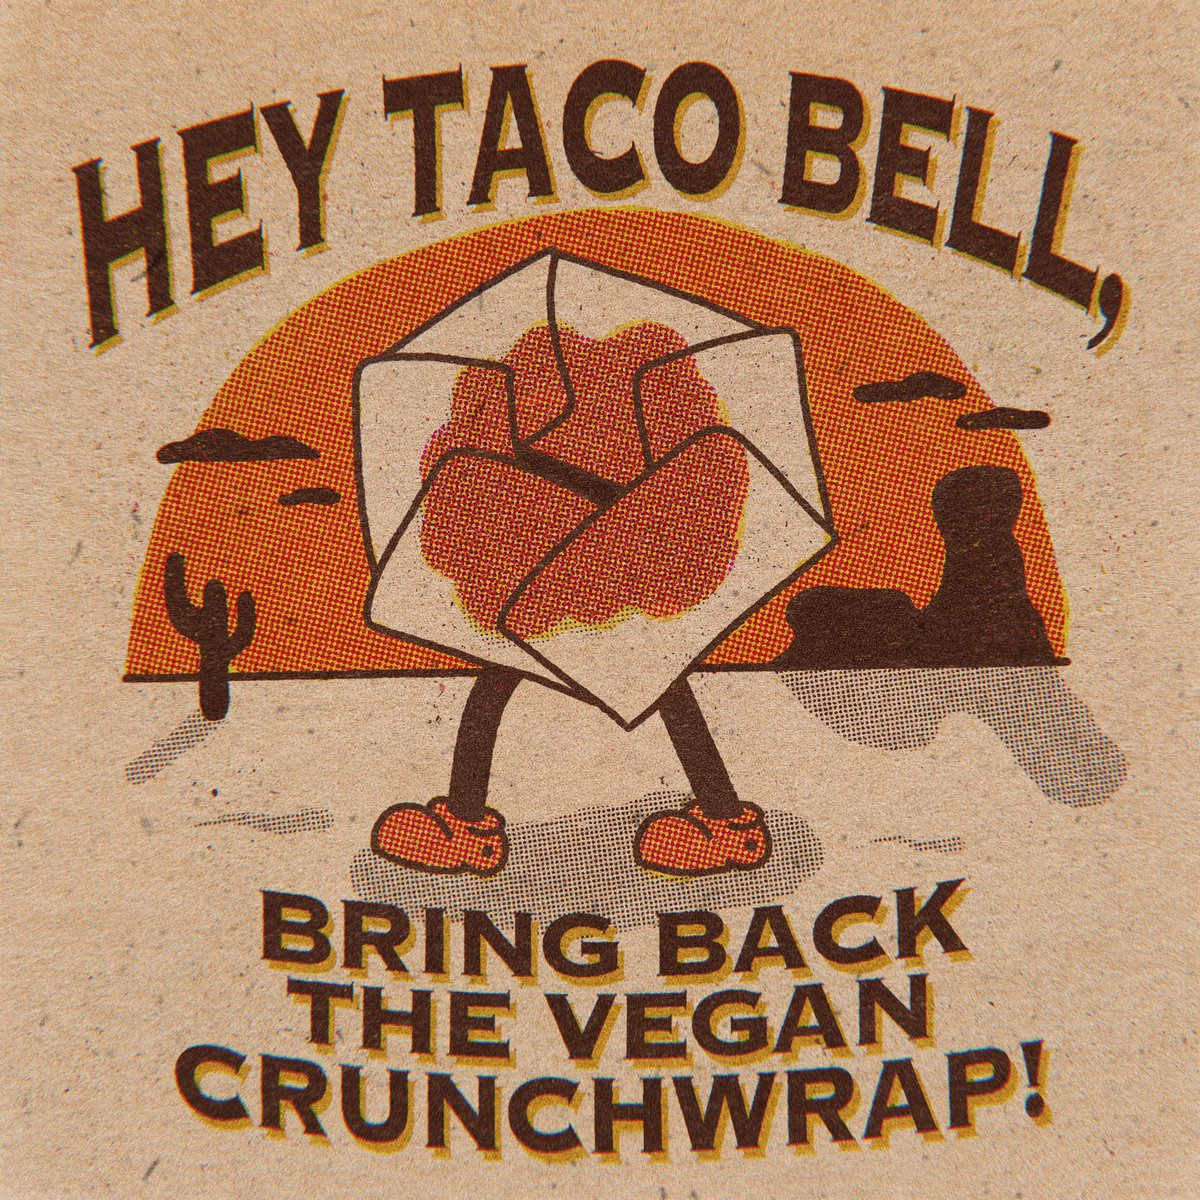 Tag @tacobell below if you want them to bring back the #vegan crunchwrap nationwide!